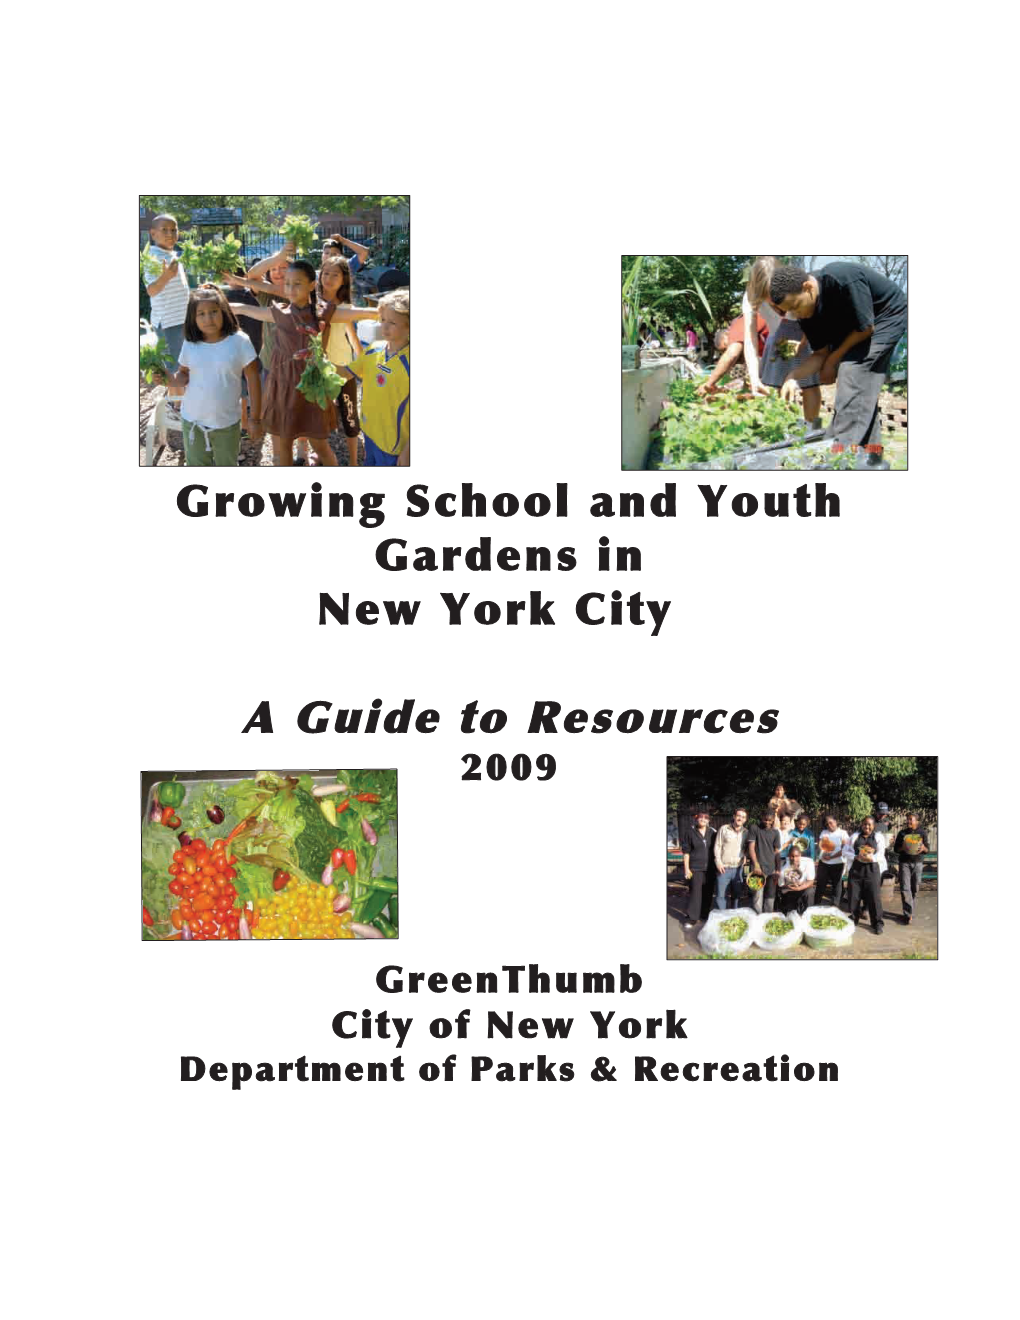 Growing School and Youth Gardens in New York City a Guide To